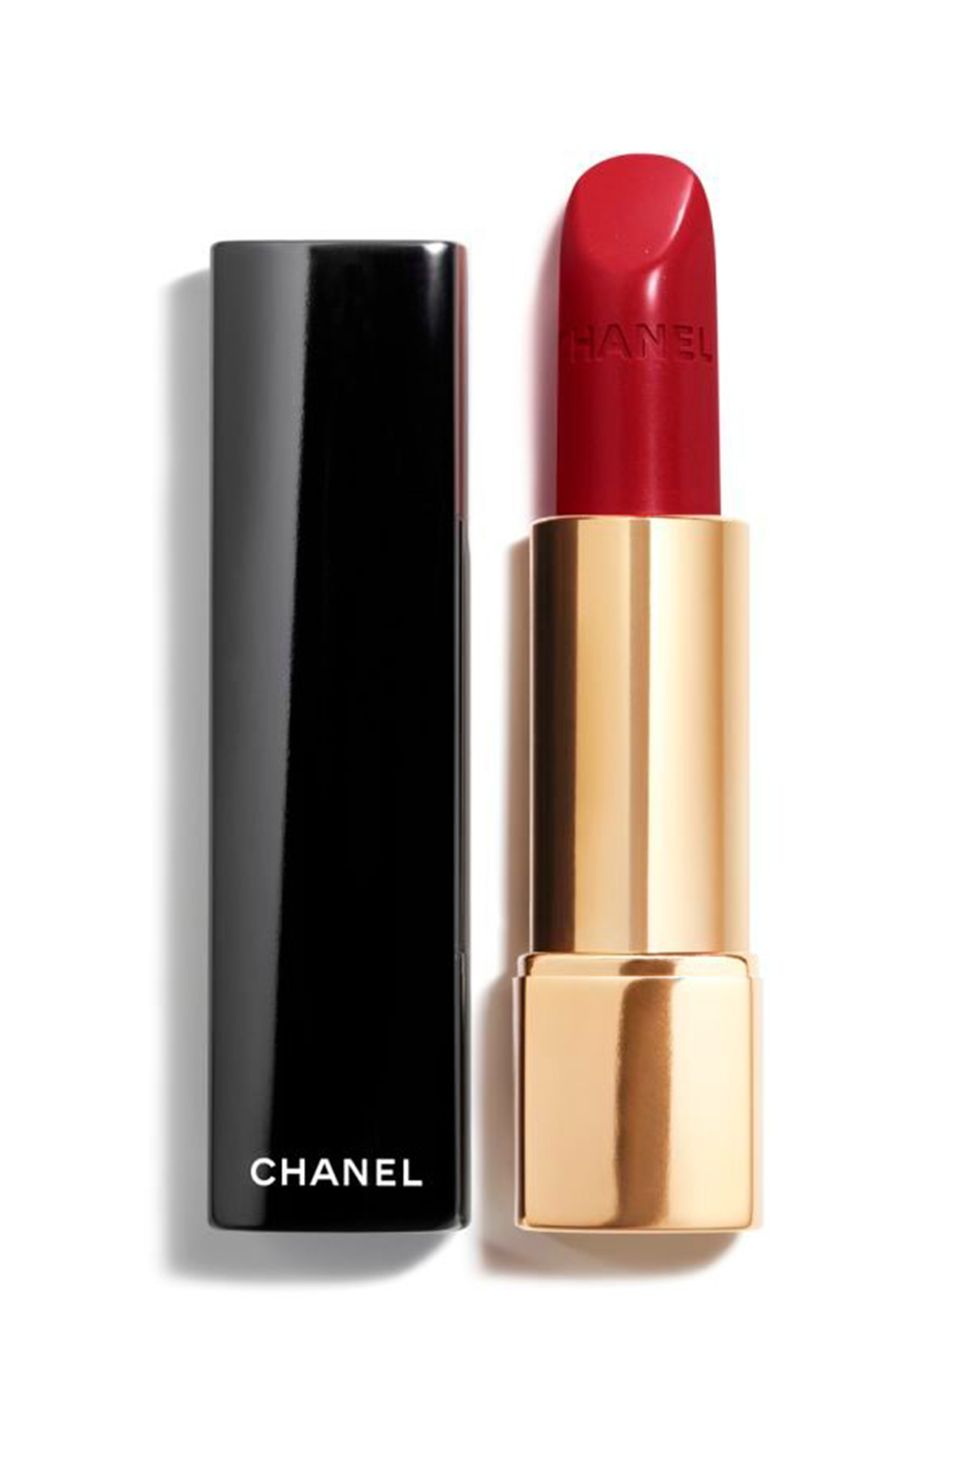 Chanel beauty products 